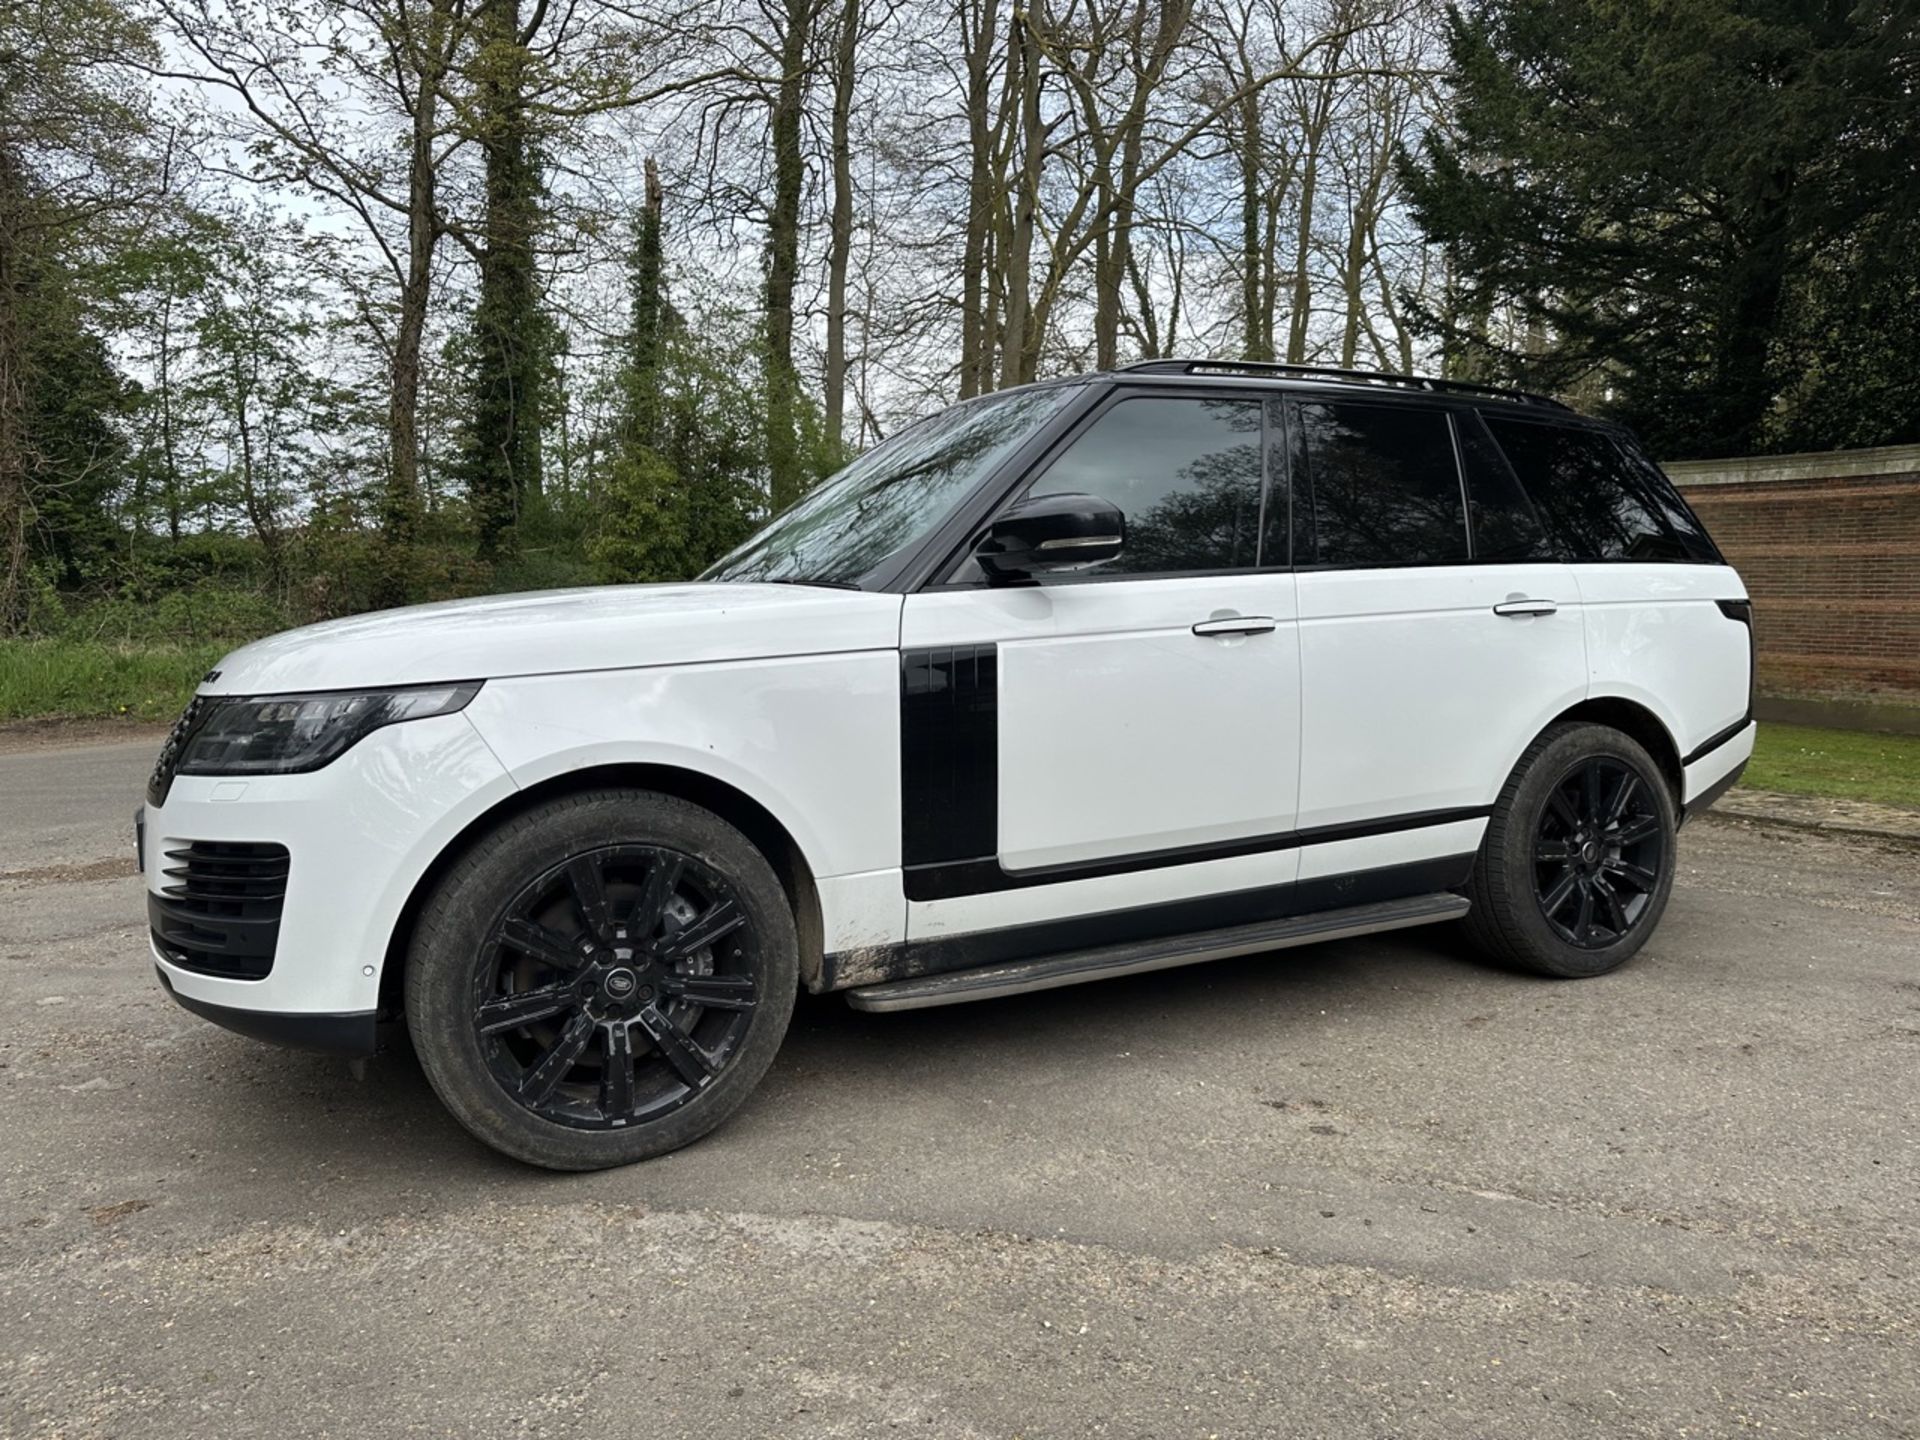 LAND ROVER RANGE ROVER 2.0 P400e Autobiography 4dr Auto - Automatic - 2018 - 31k miles - FULL SH - Image 2 of 22